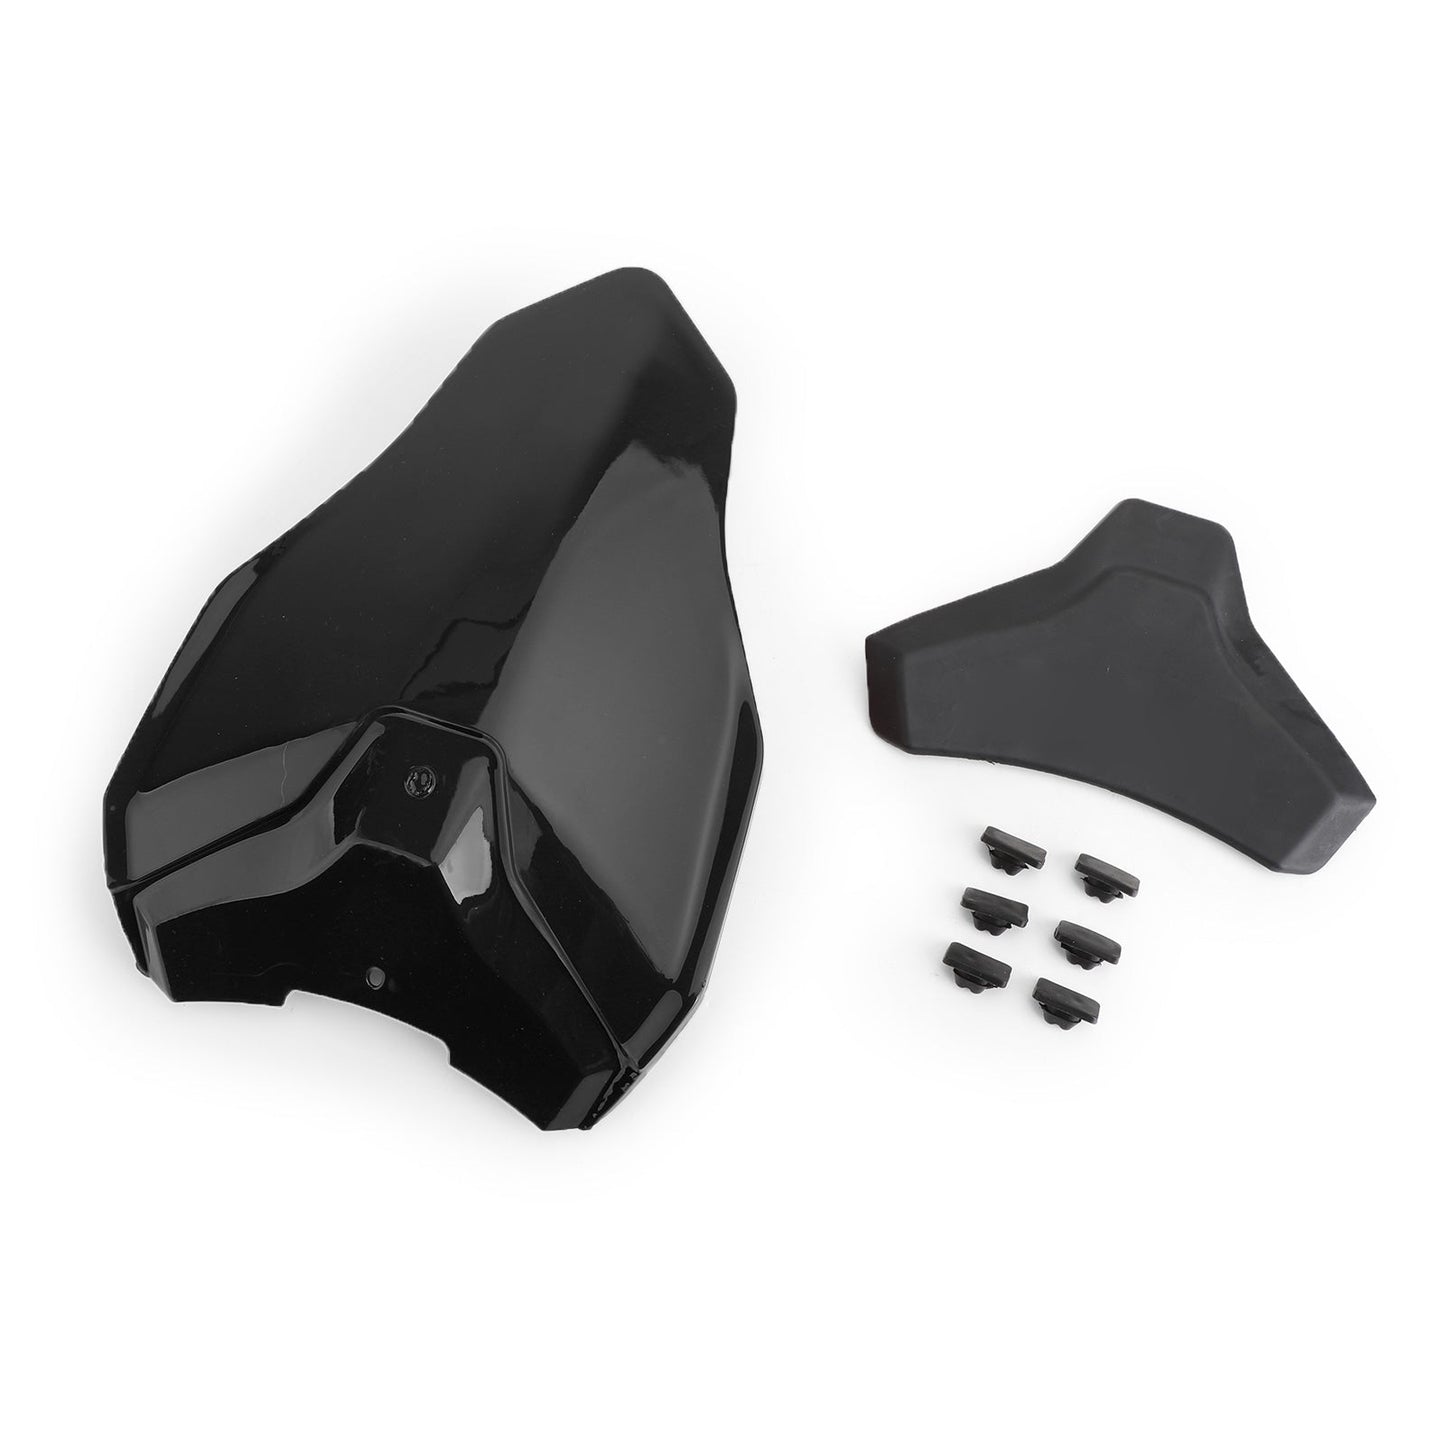 Motorcycle ABS Rear Seat Fairing Cover Cowl For DUCATI 848/1098/1198 07-09 Black